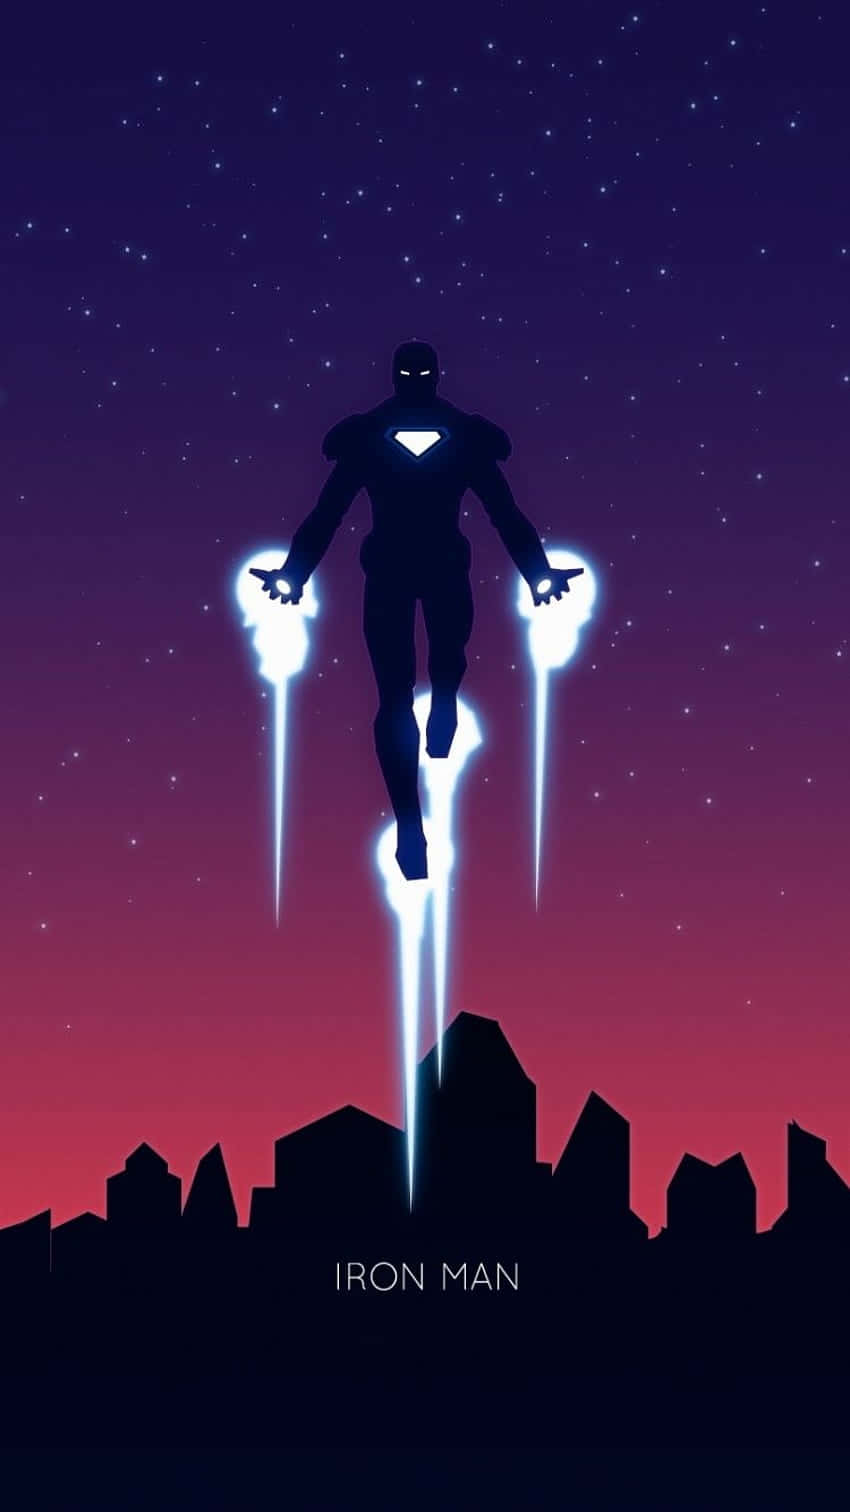 Iron Man Fan Art That Will Have You Conquering the Universe Wallpaper